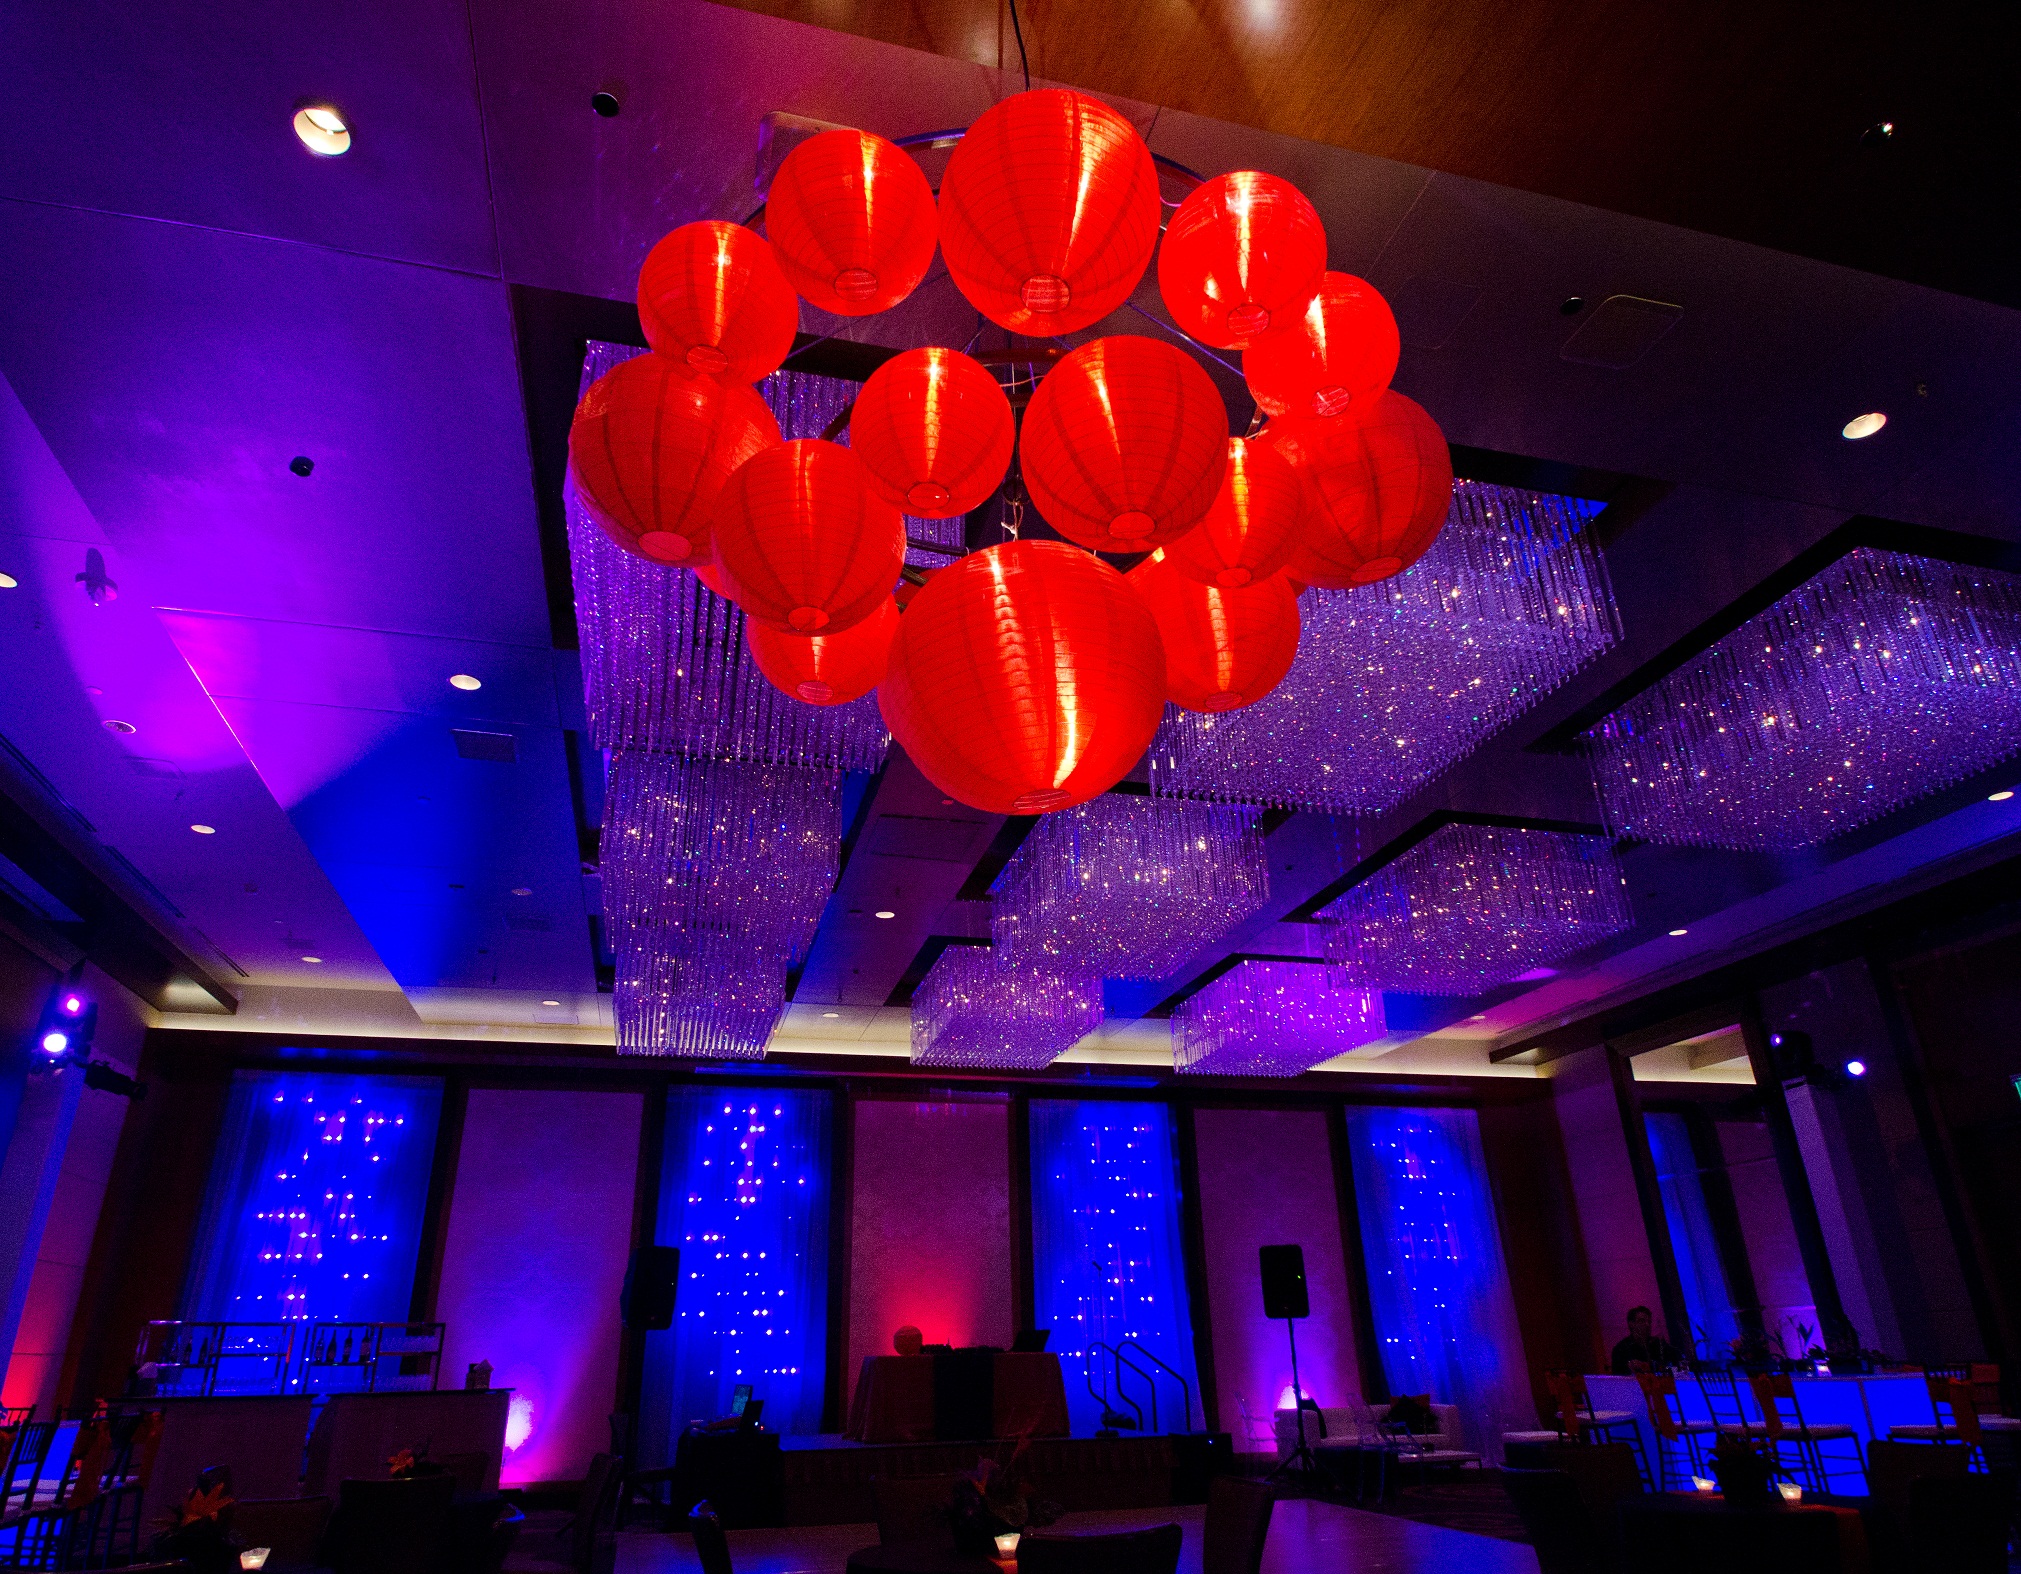 Chipotle-Party-2011-Red-Lanterns-SE-Asian-Theme-WM-Events-Corporate-Planner